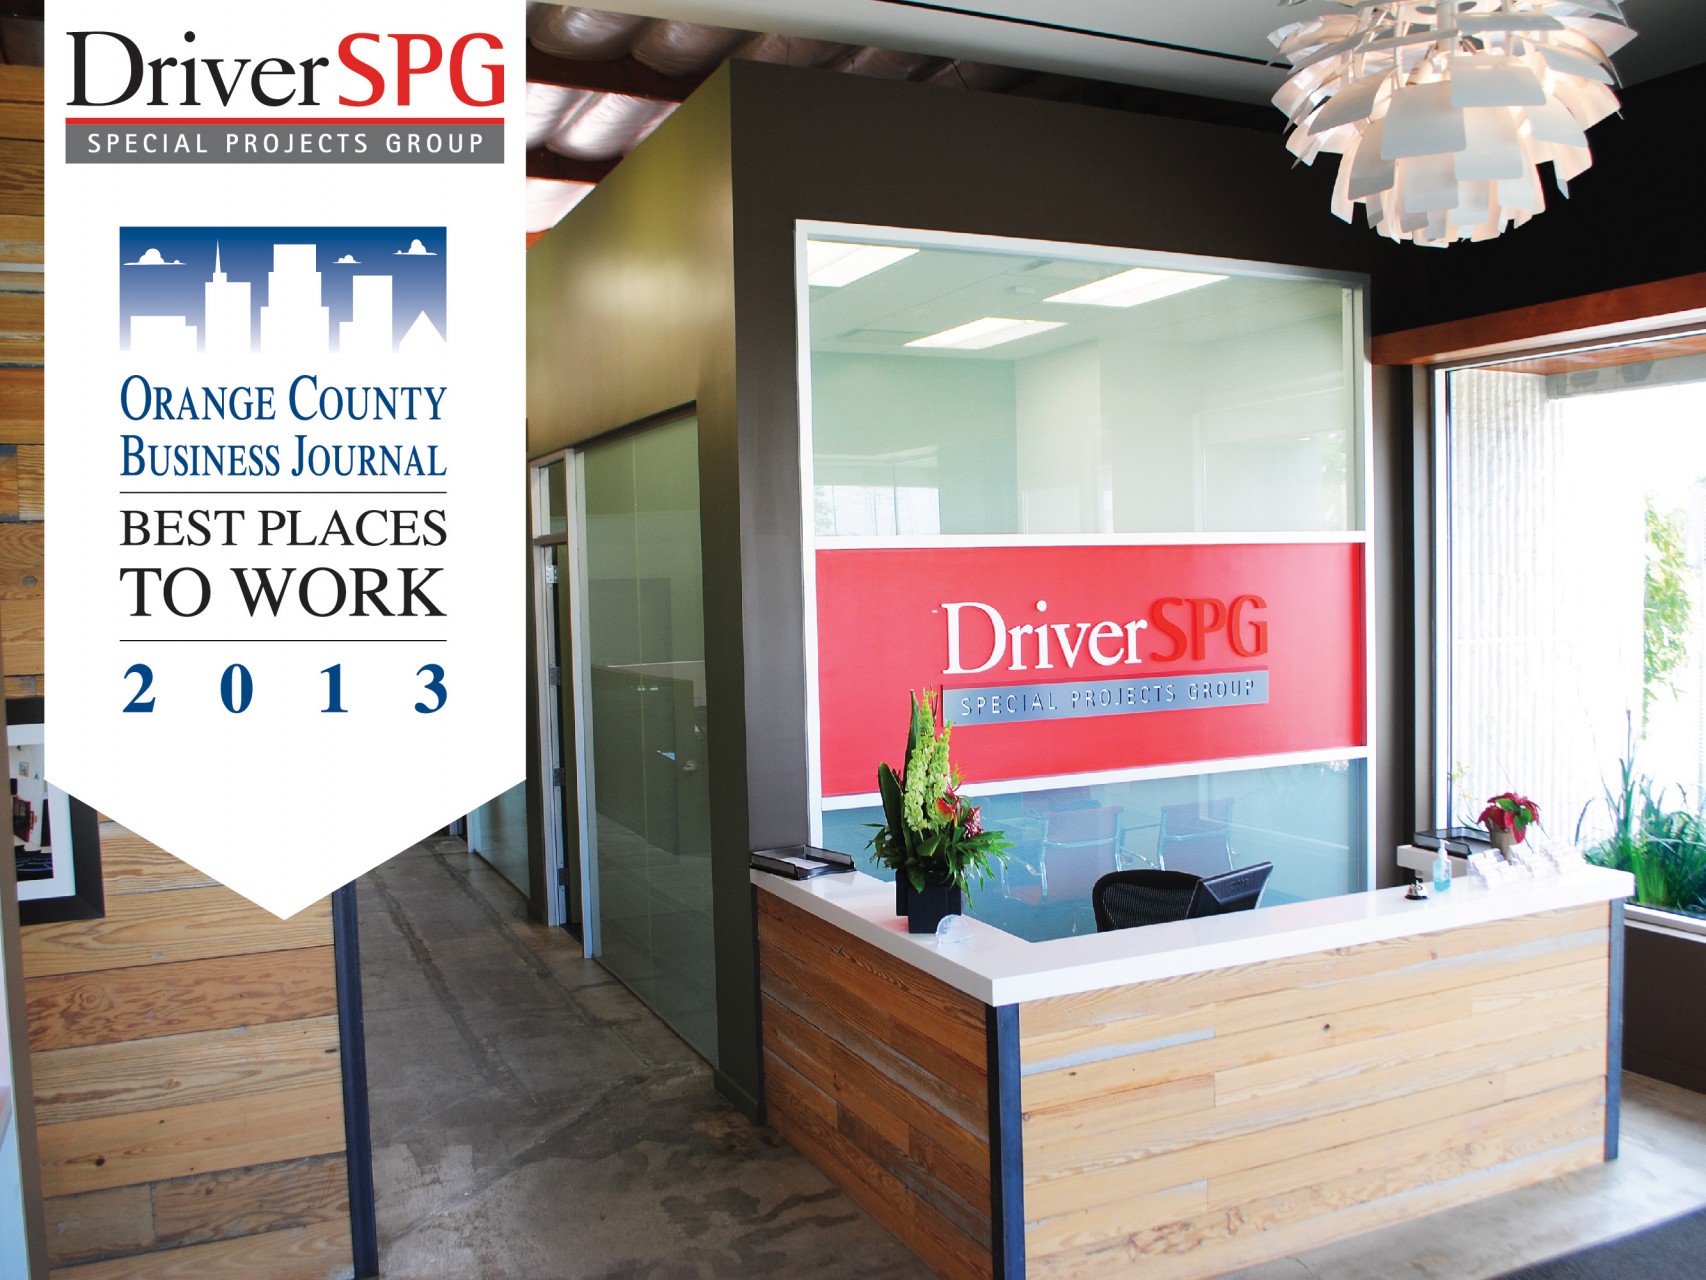 2013 Best Places to Work Award – Driver SPG